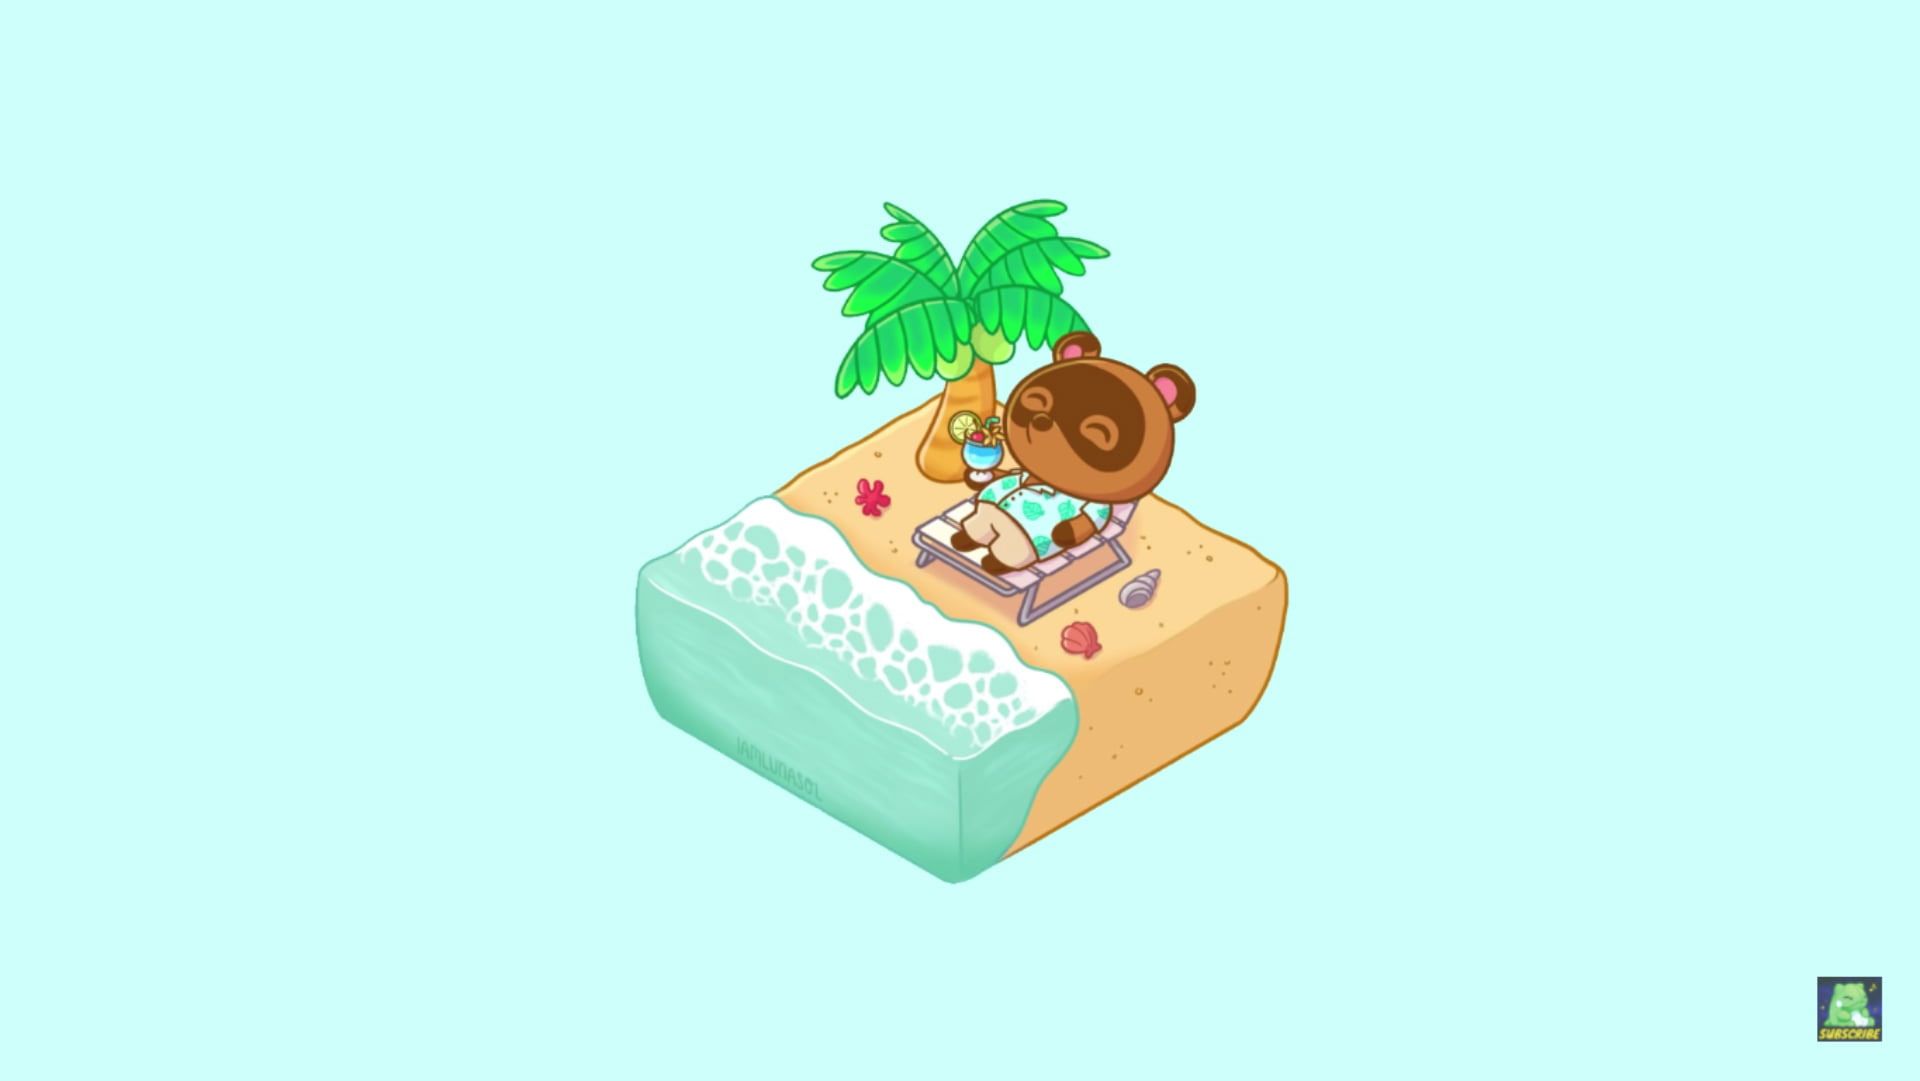 A cartoon of an island with palm trees - Animal Crossing